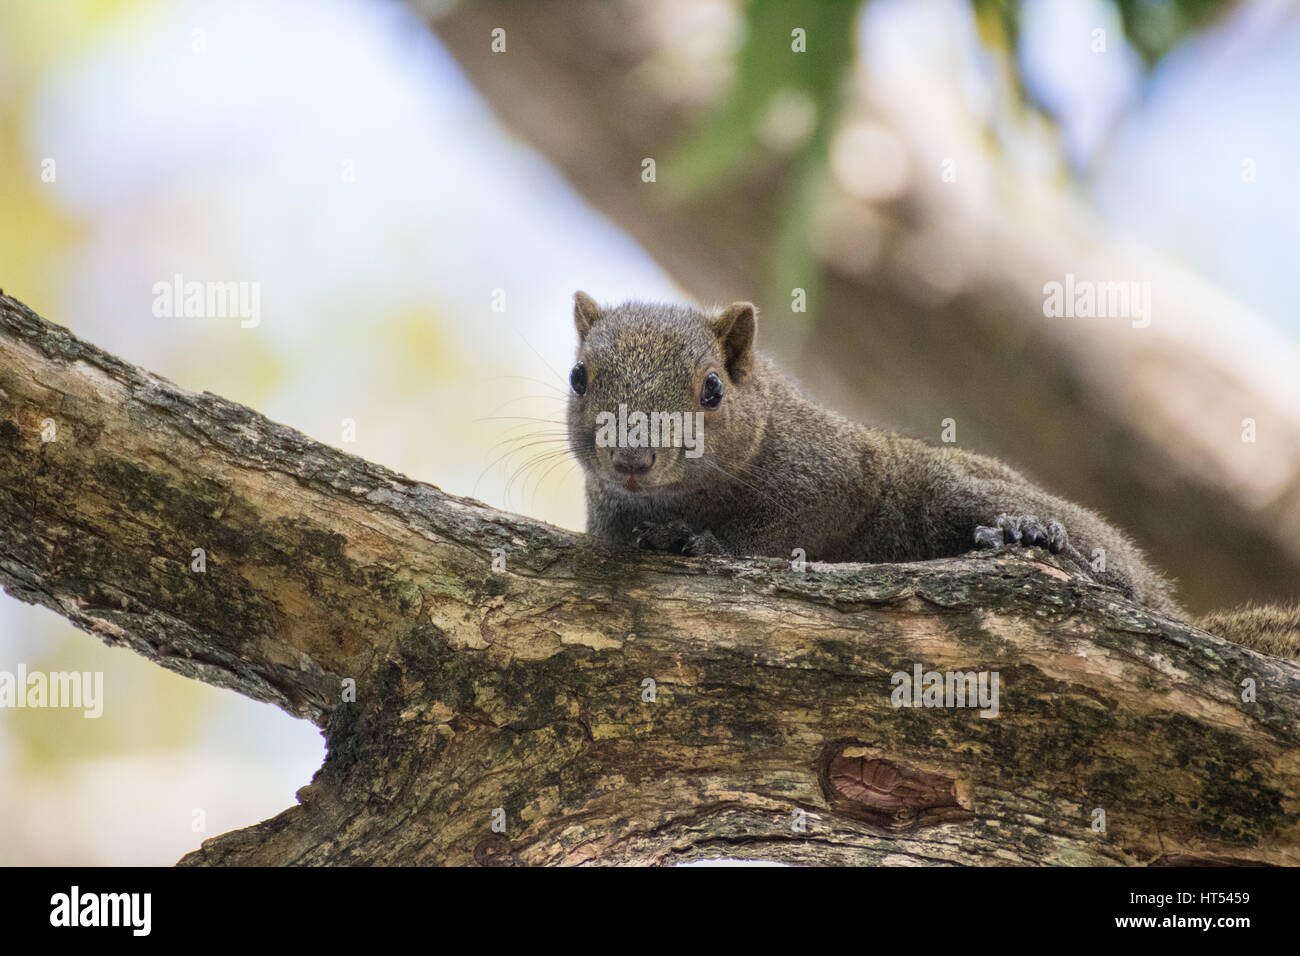 Squirrel sitting on a branch Stock Photo